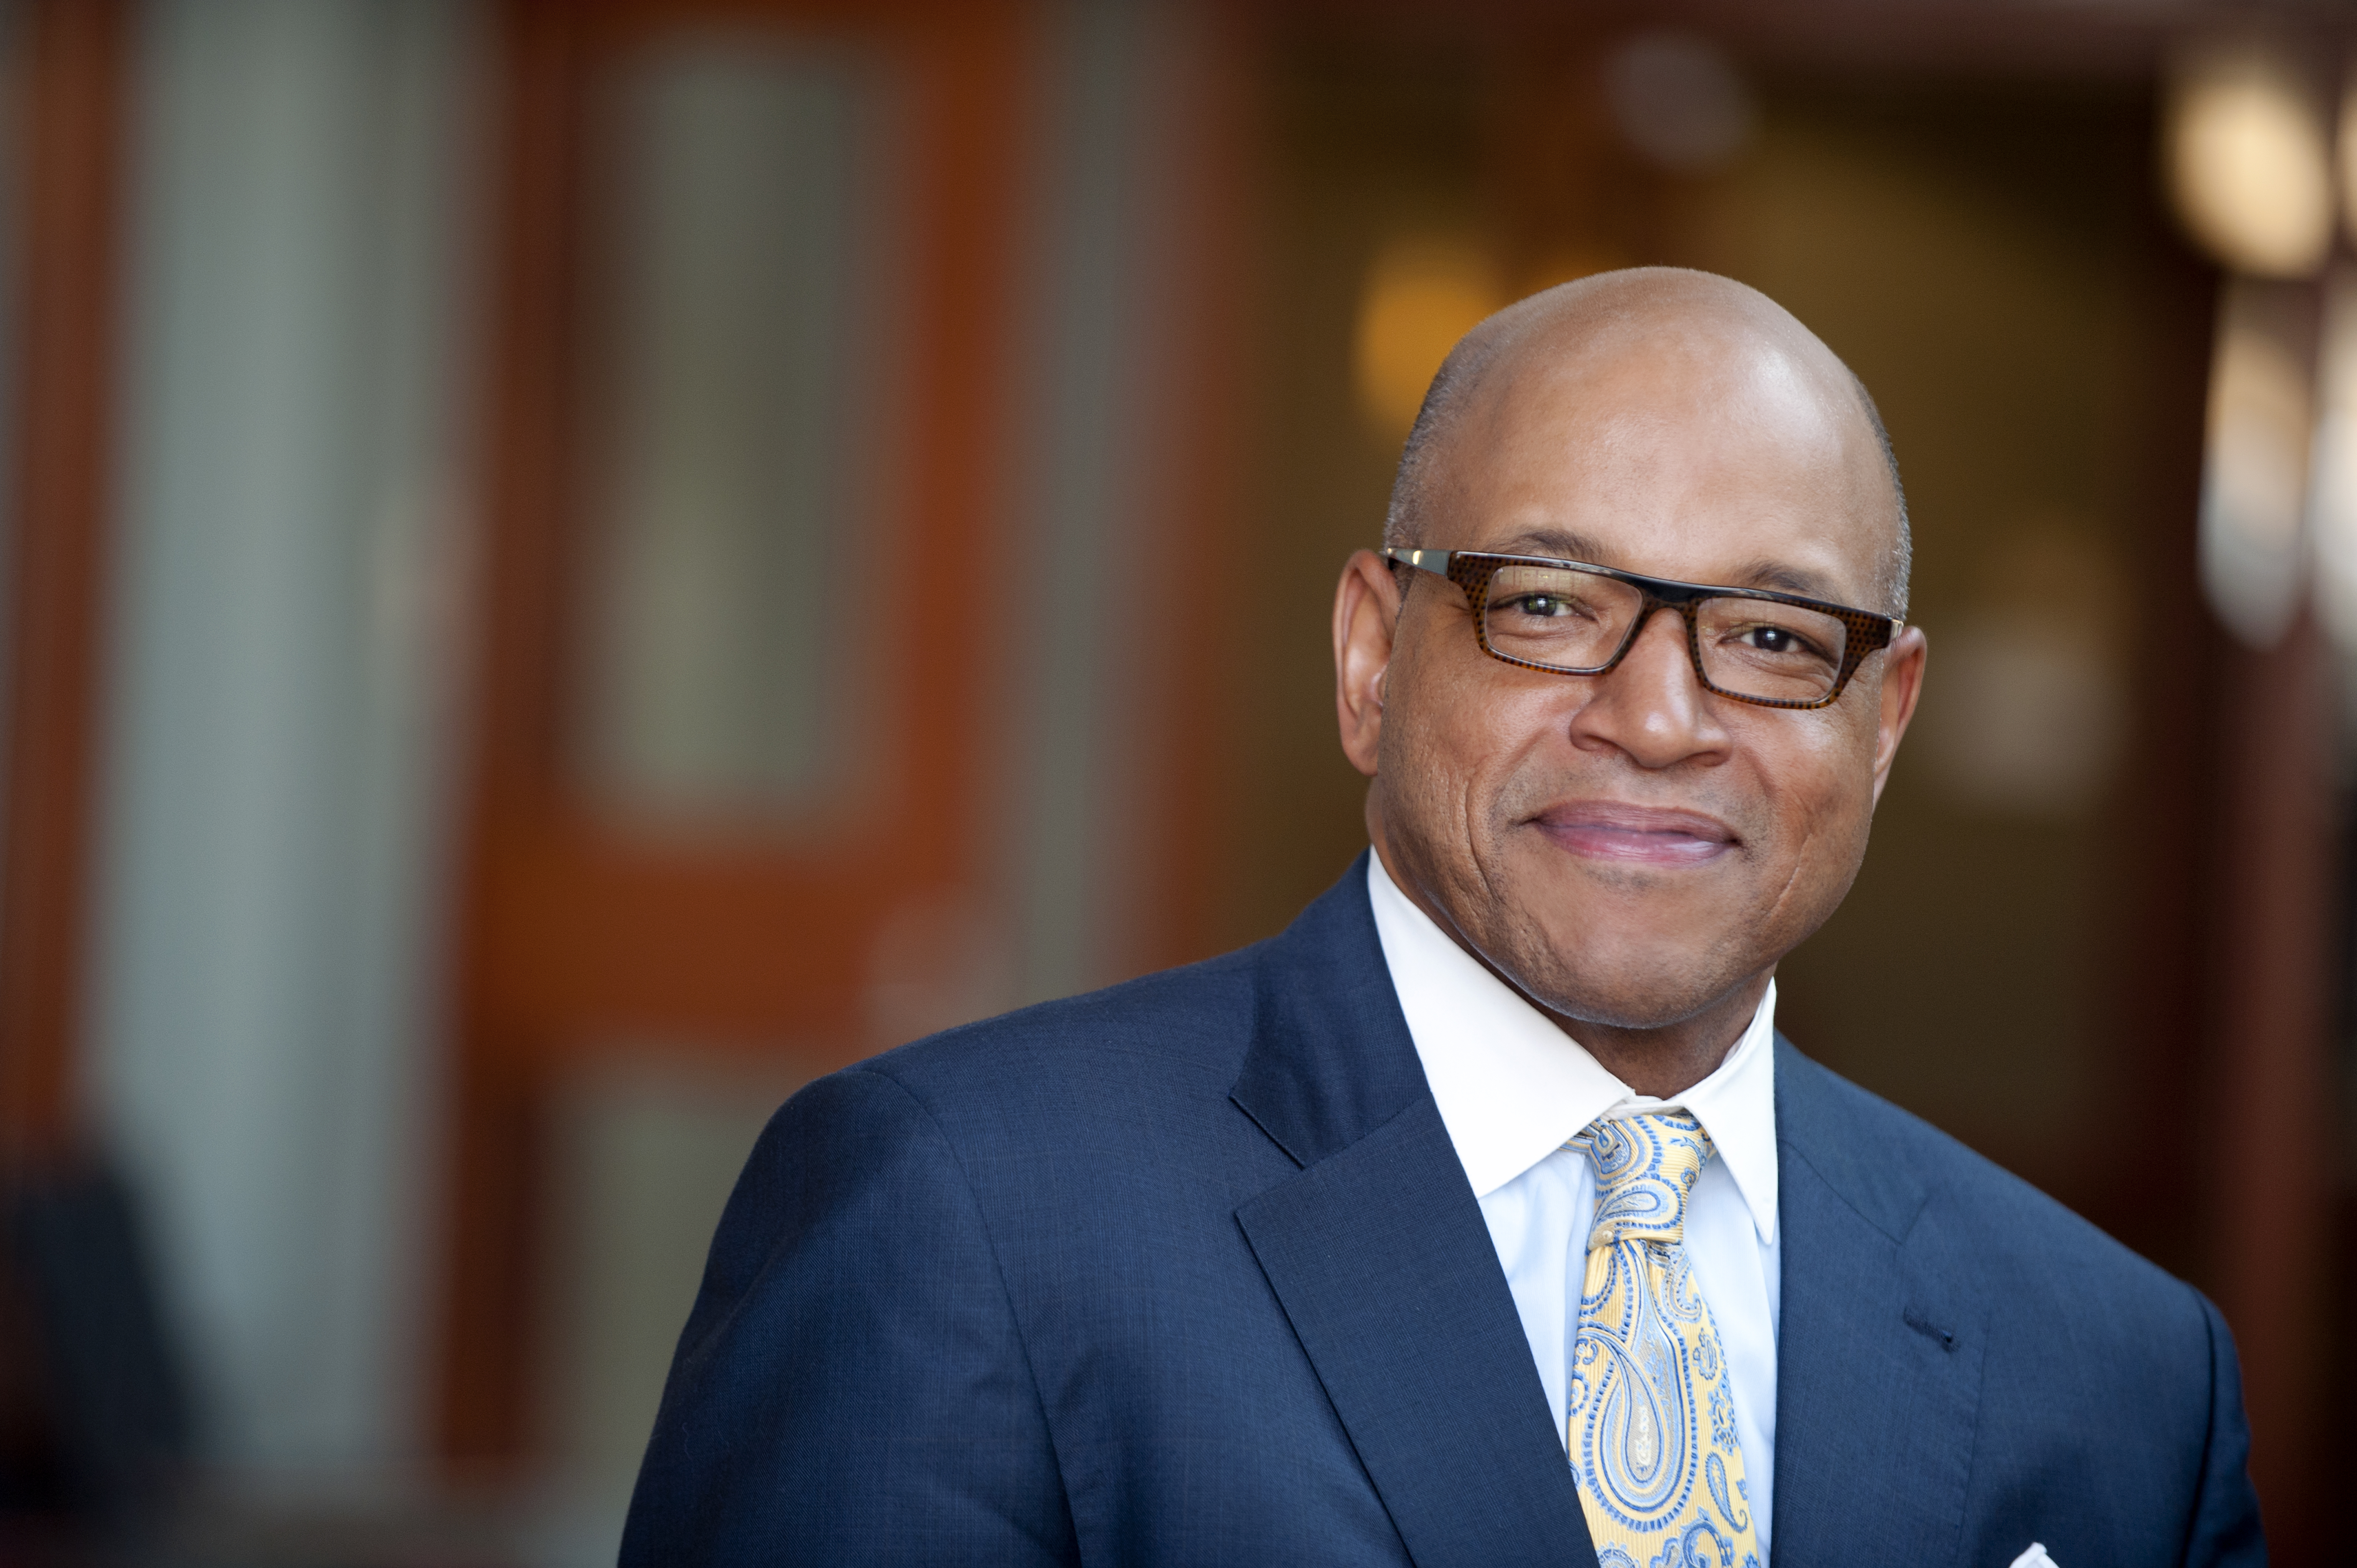 Georgetown Dean David Thomas was inspired by the leaders of the civil rights movement 